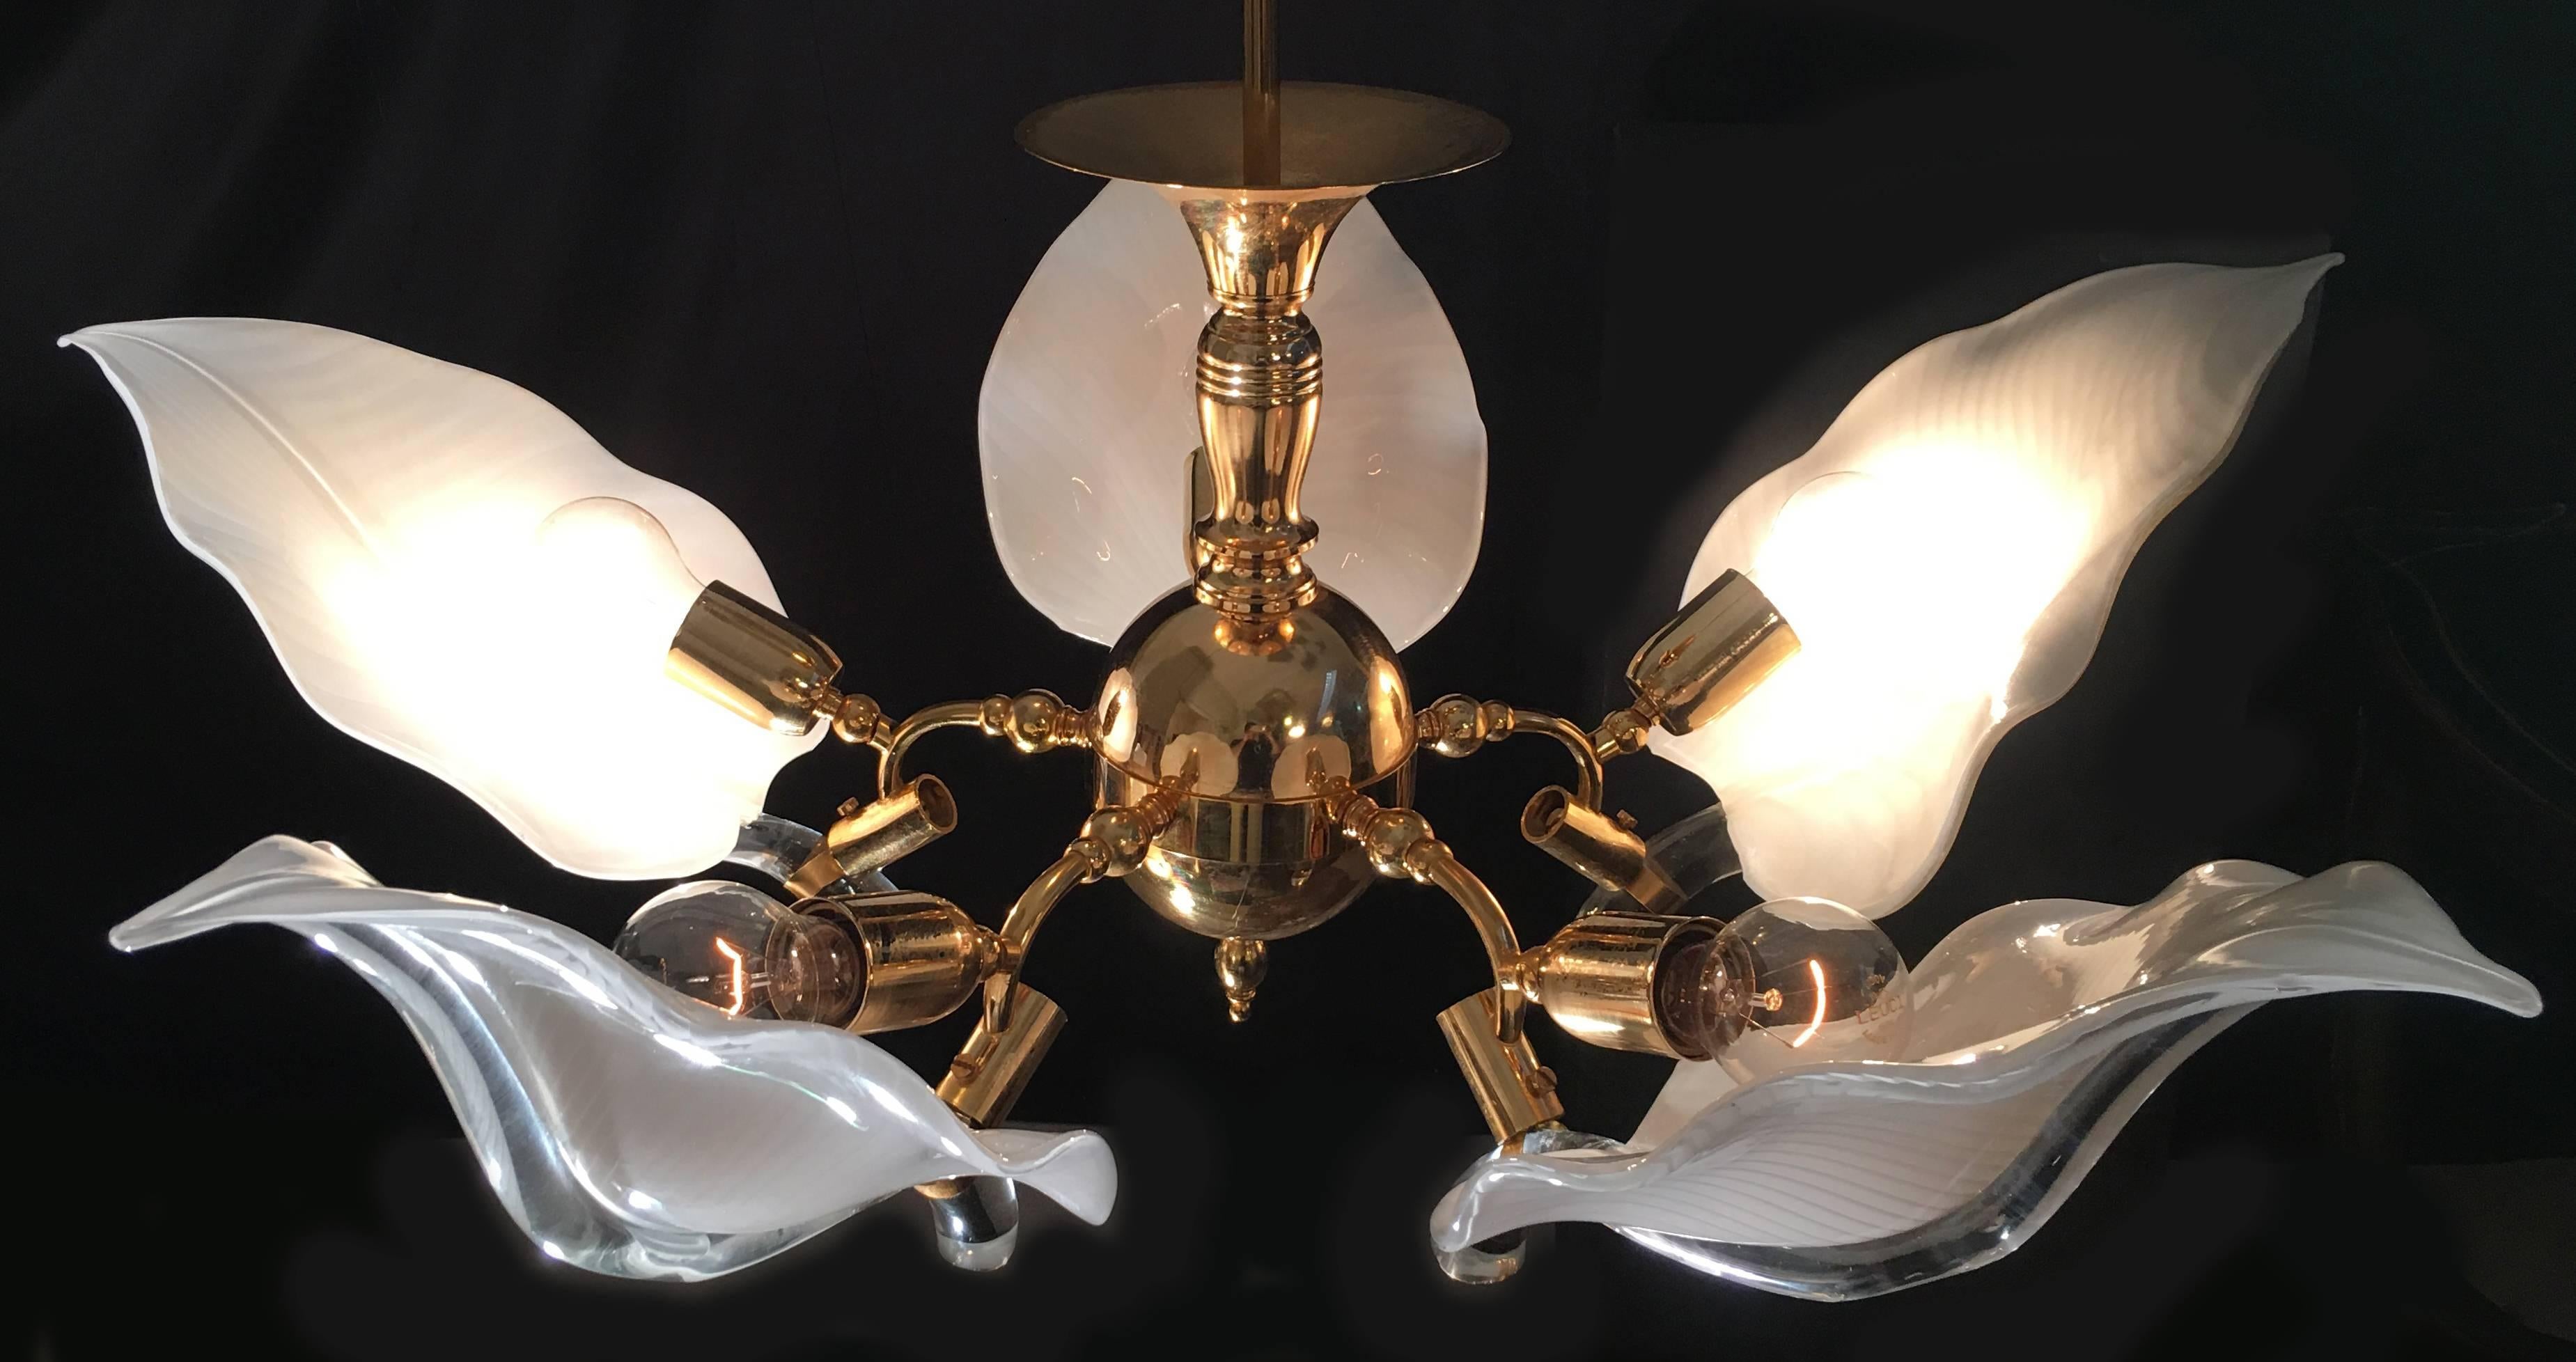 Great and wonderfully precious Murano chandelier in handblown glass leaves and gold-plated hardware by the famous master designer Franco Luce. Also available a pair of sconces.